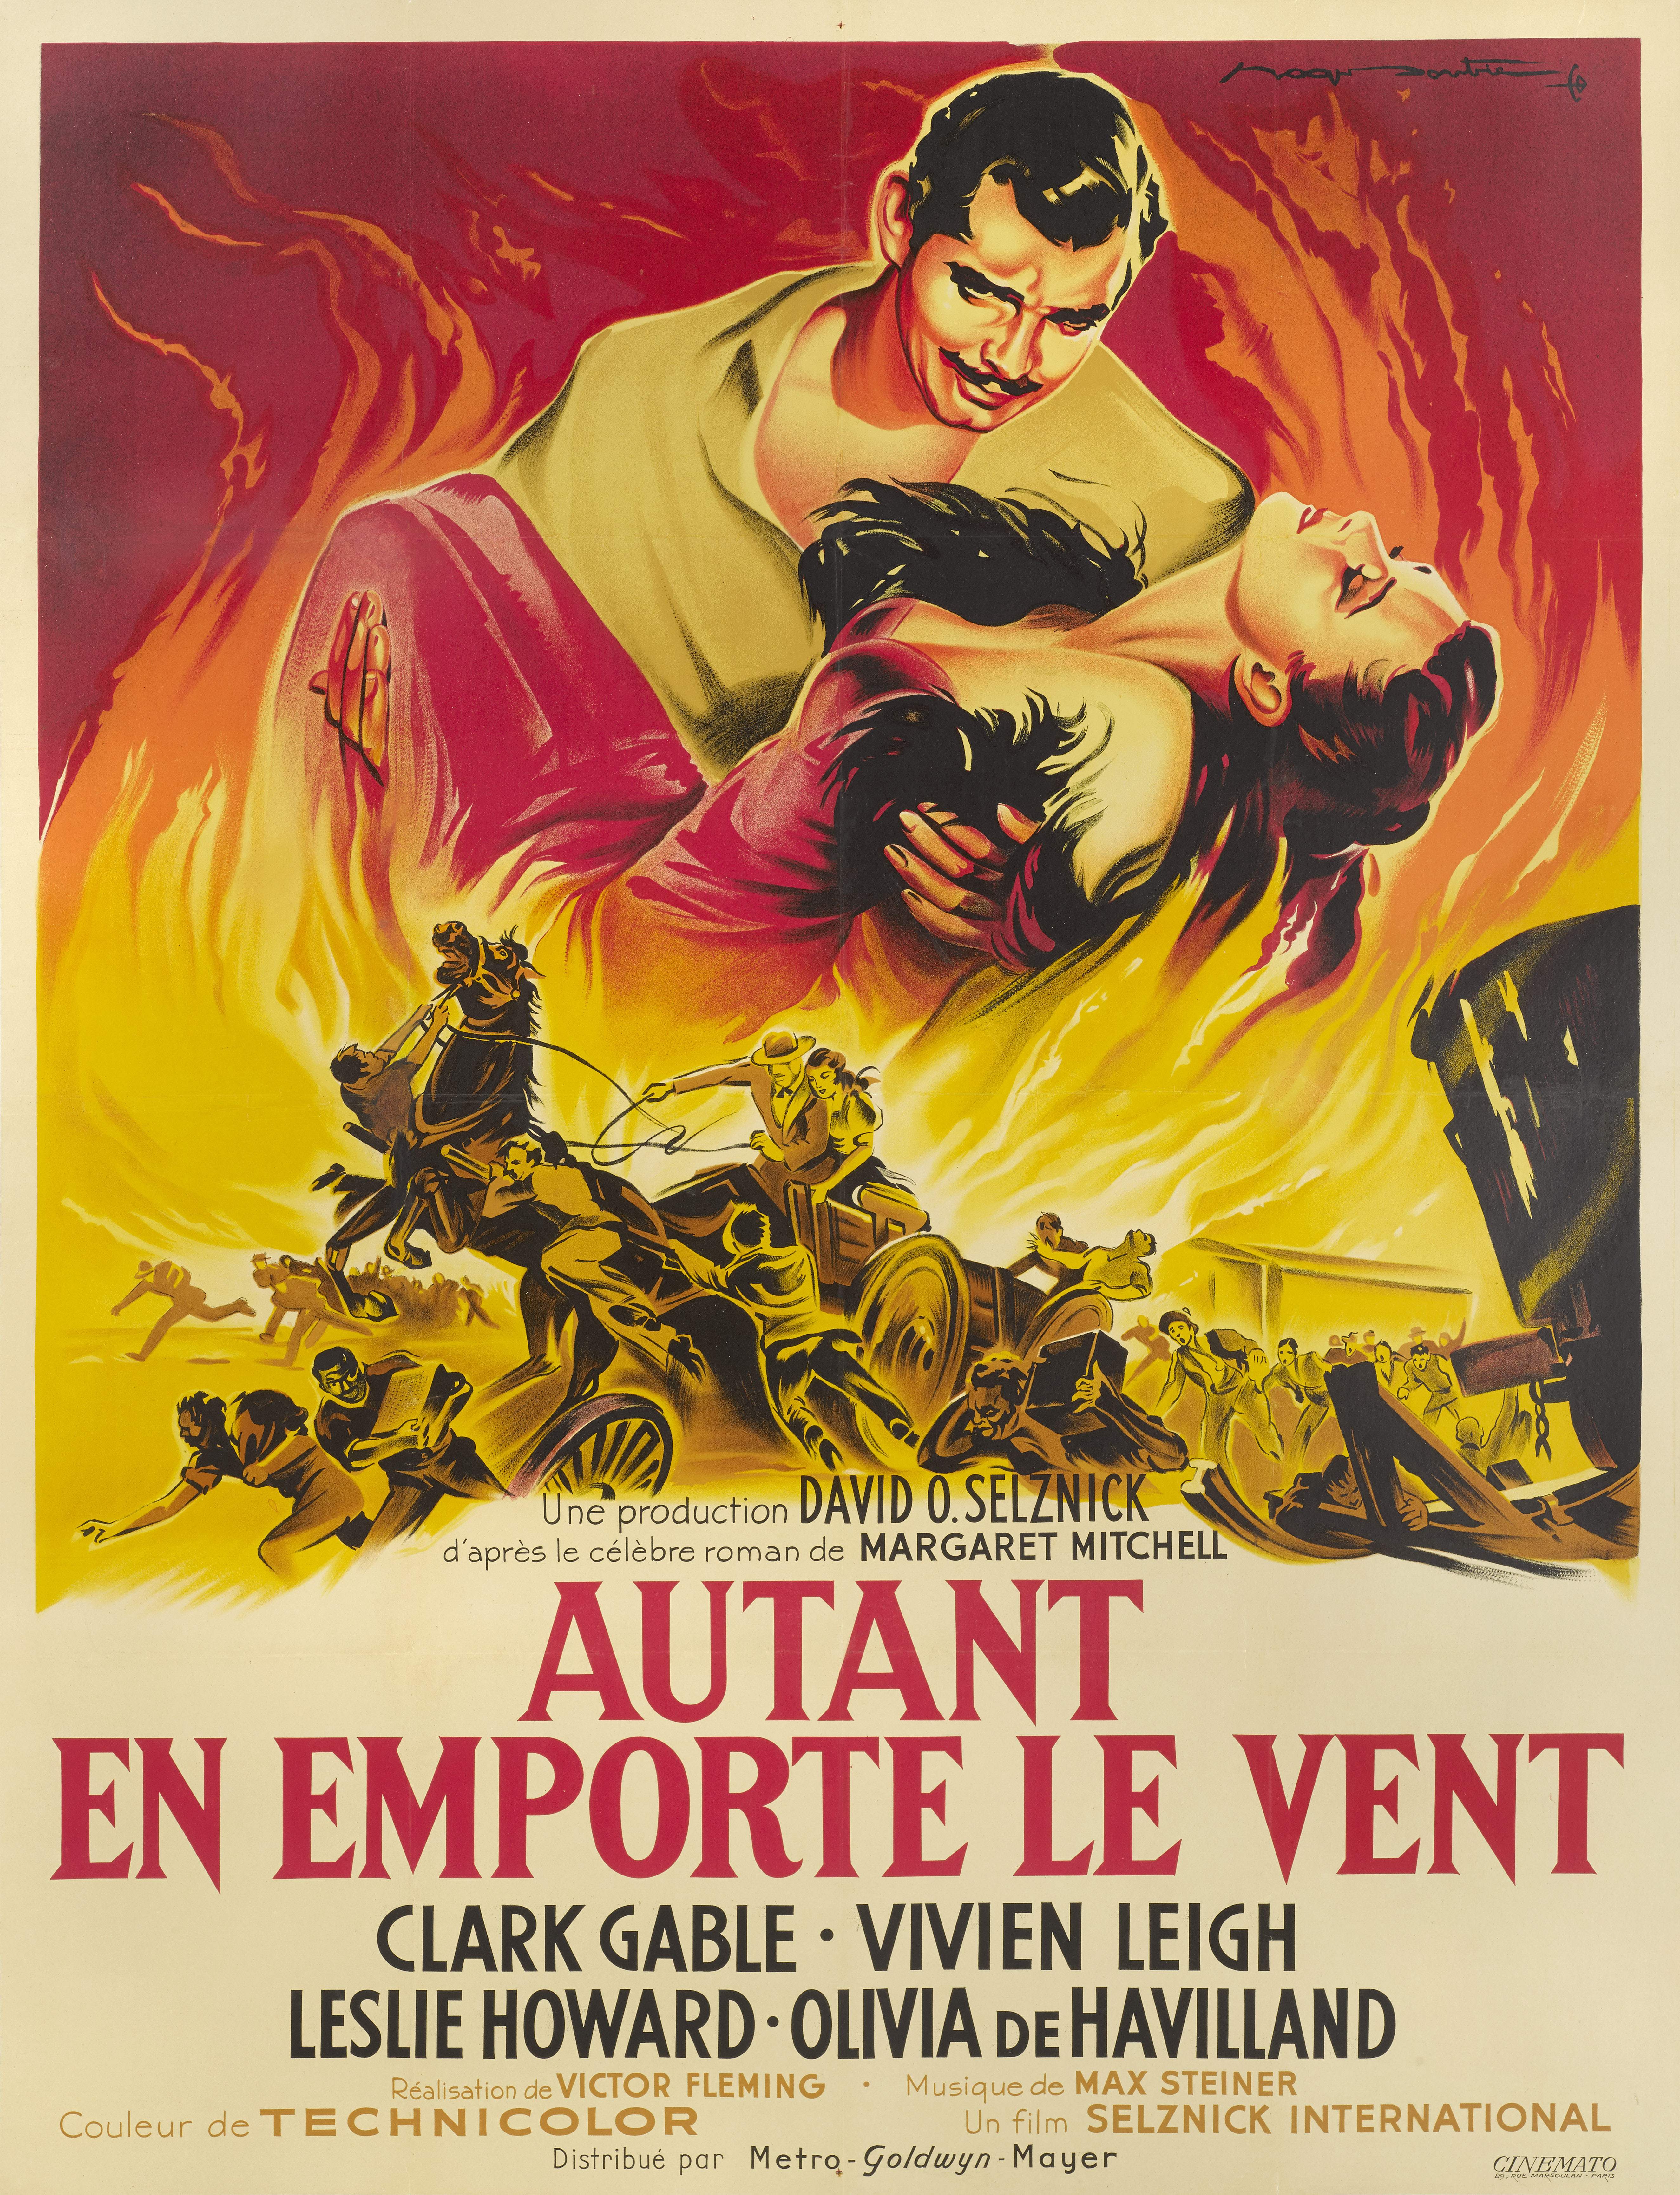 Gone with the Wind (1939) Original French poster. Re-release 1953 Artist: Roger Soubie (1898-1984)Un